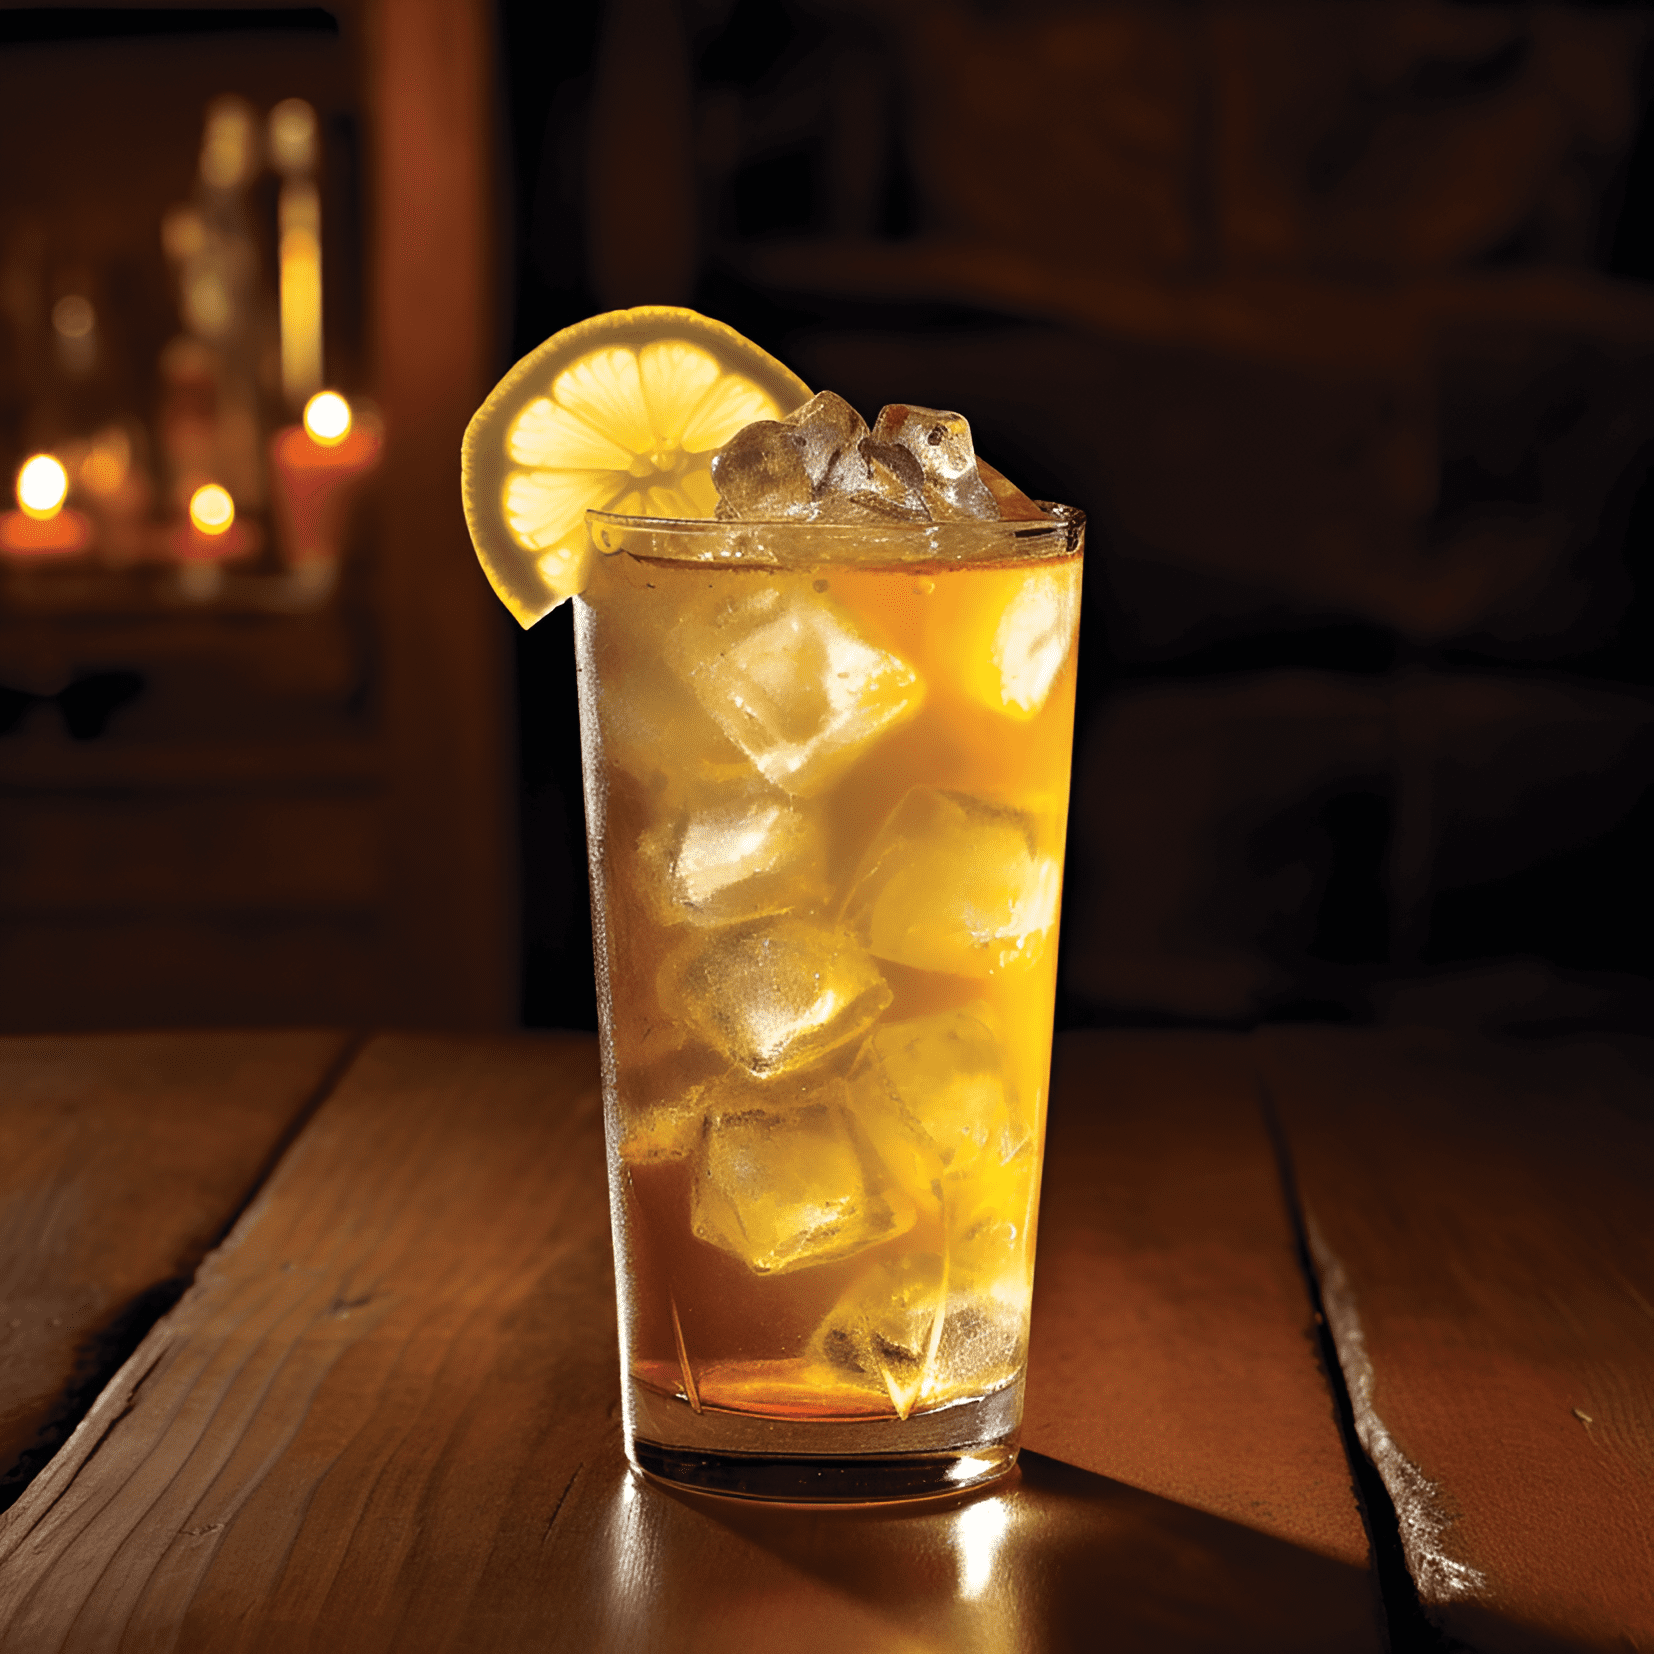 The Stone Fence has a refreshing, crisp taste with a balance of sweet and tart flavors. The hard cider provides a fruity, slightly sour base, while the rum adds warmth and depth. The result is a well-rounded, easy-drinking cocktail that is perfect for any occasion.